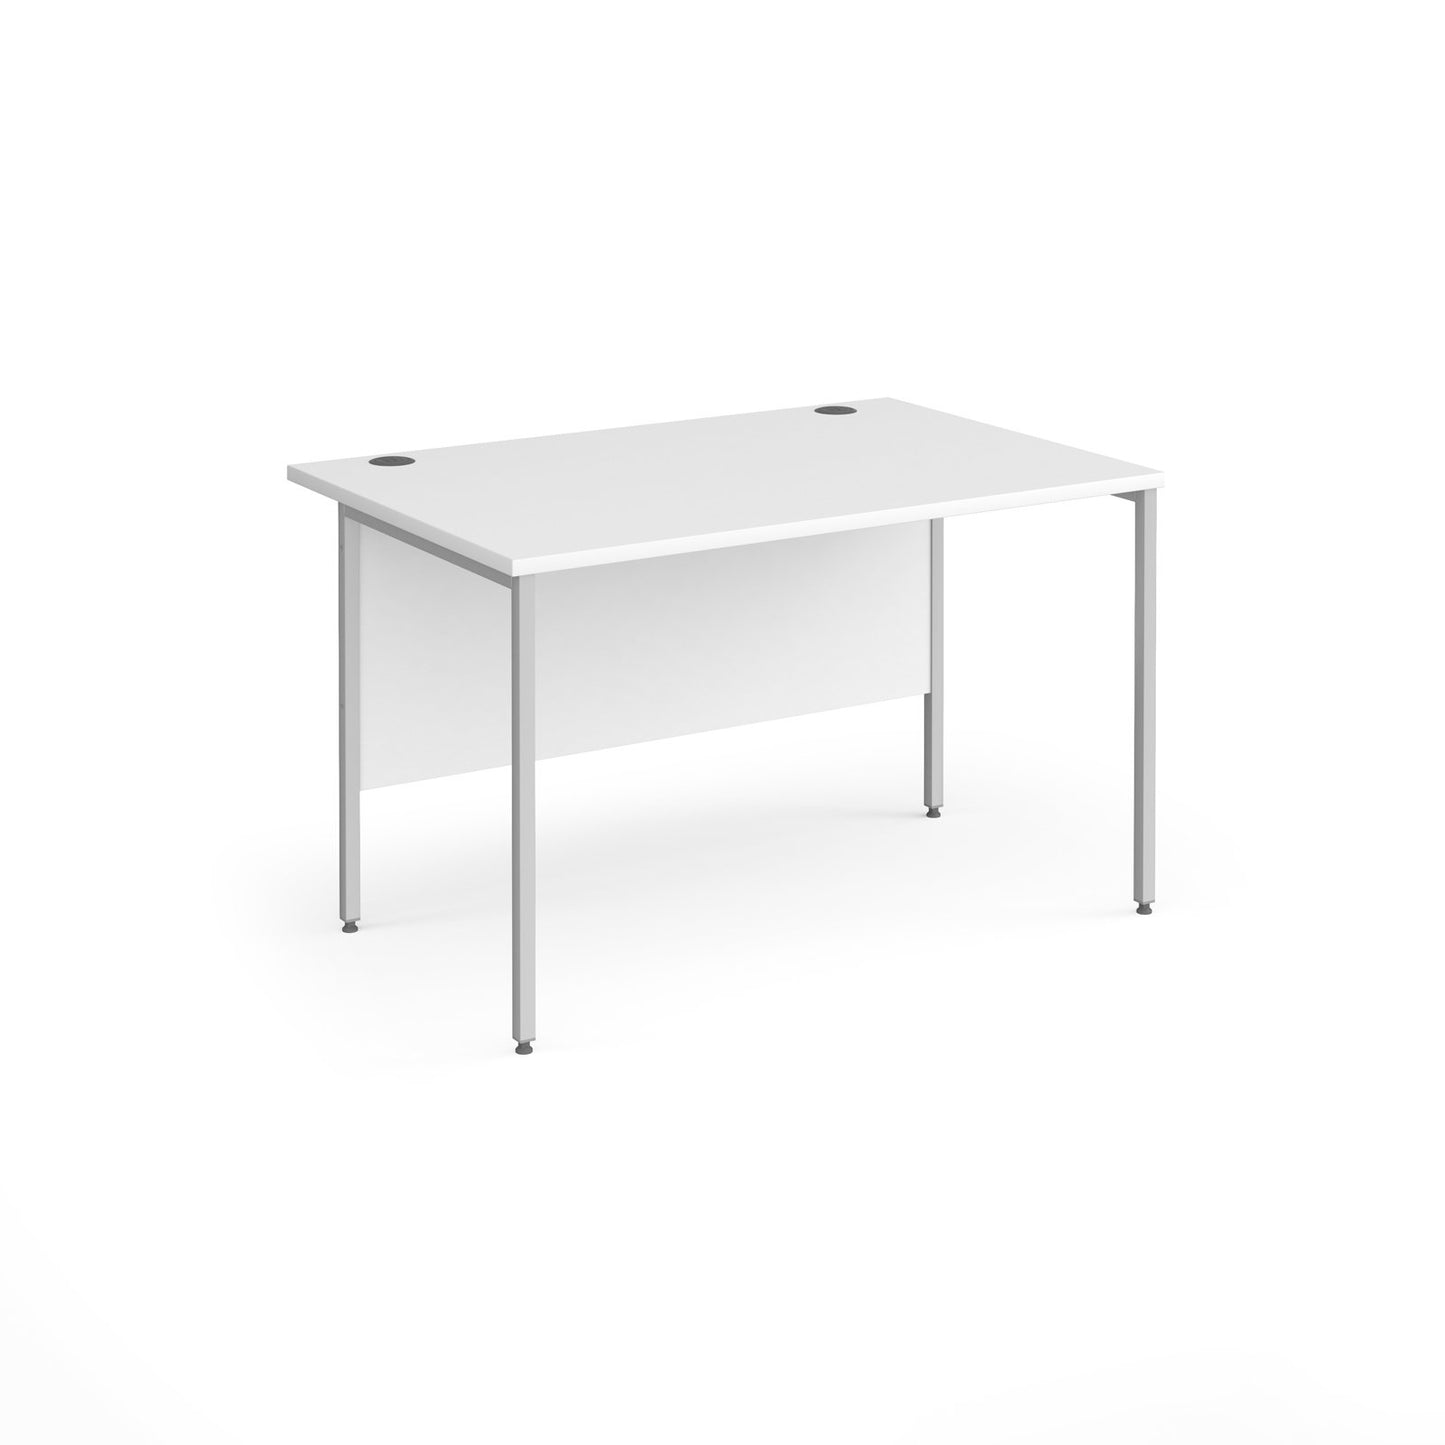 Contract 25 H-Frame straight desk